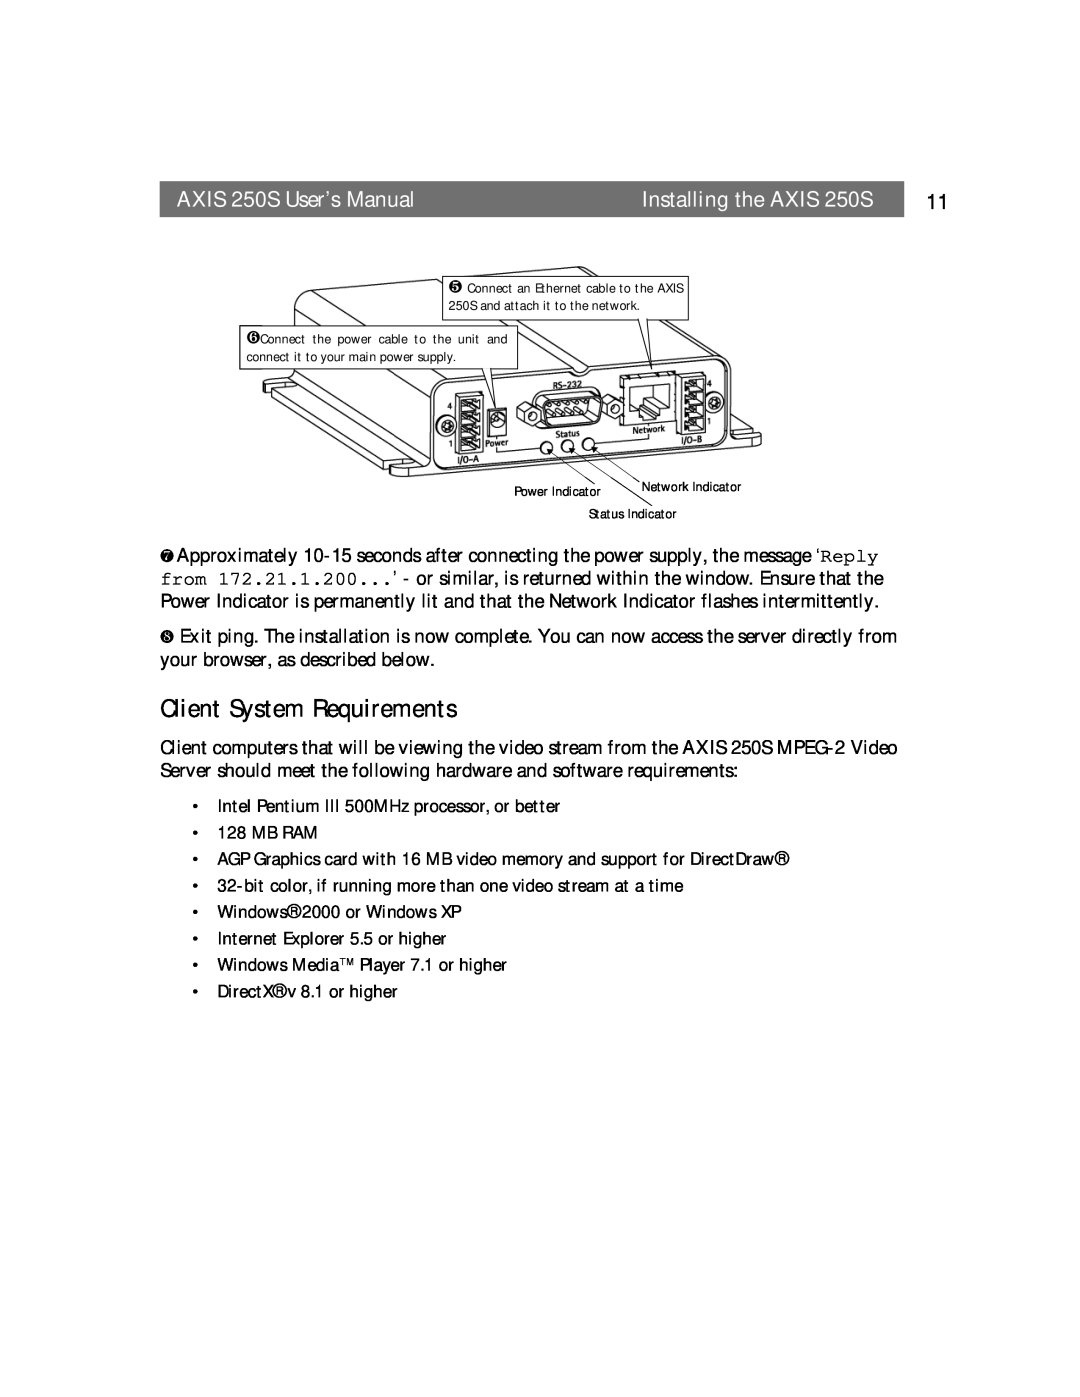 Axis Communications user manual Client System Requirements, AXIS 250S User’s Manual, Installing the AXIS 250S 